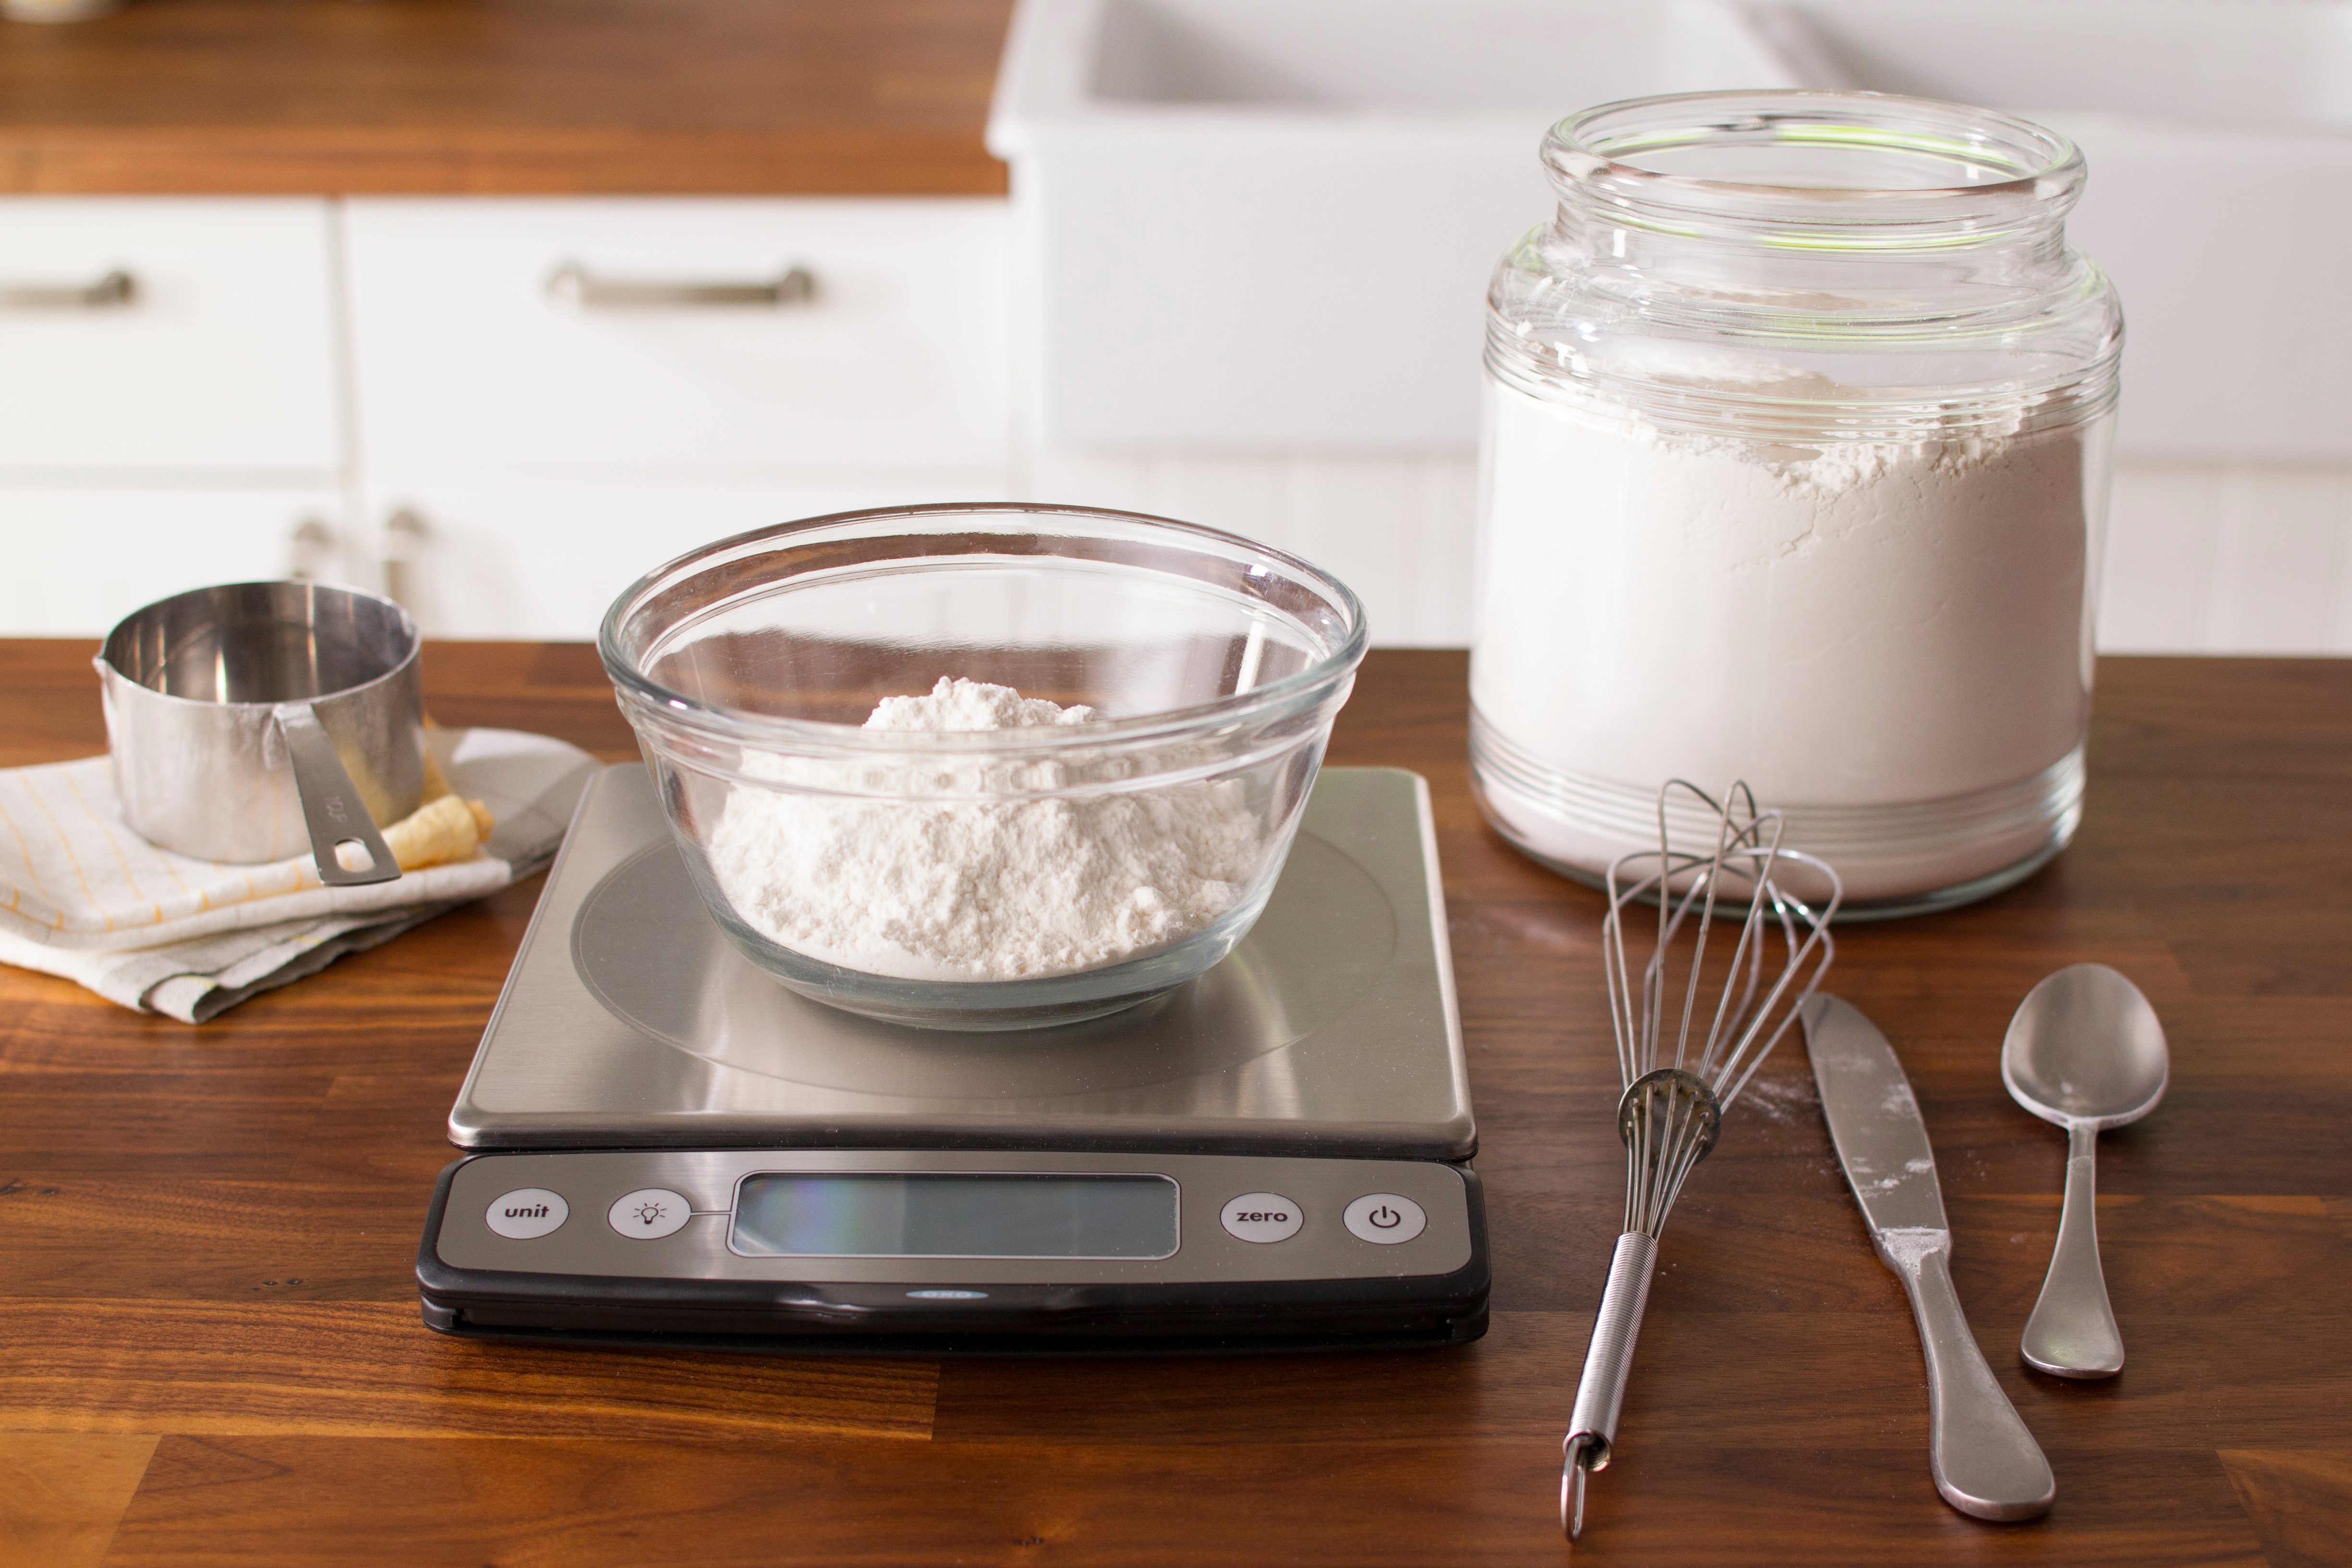 How to Measure Flour (without a scale!)